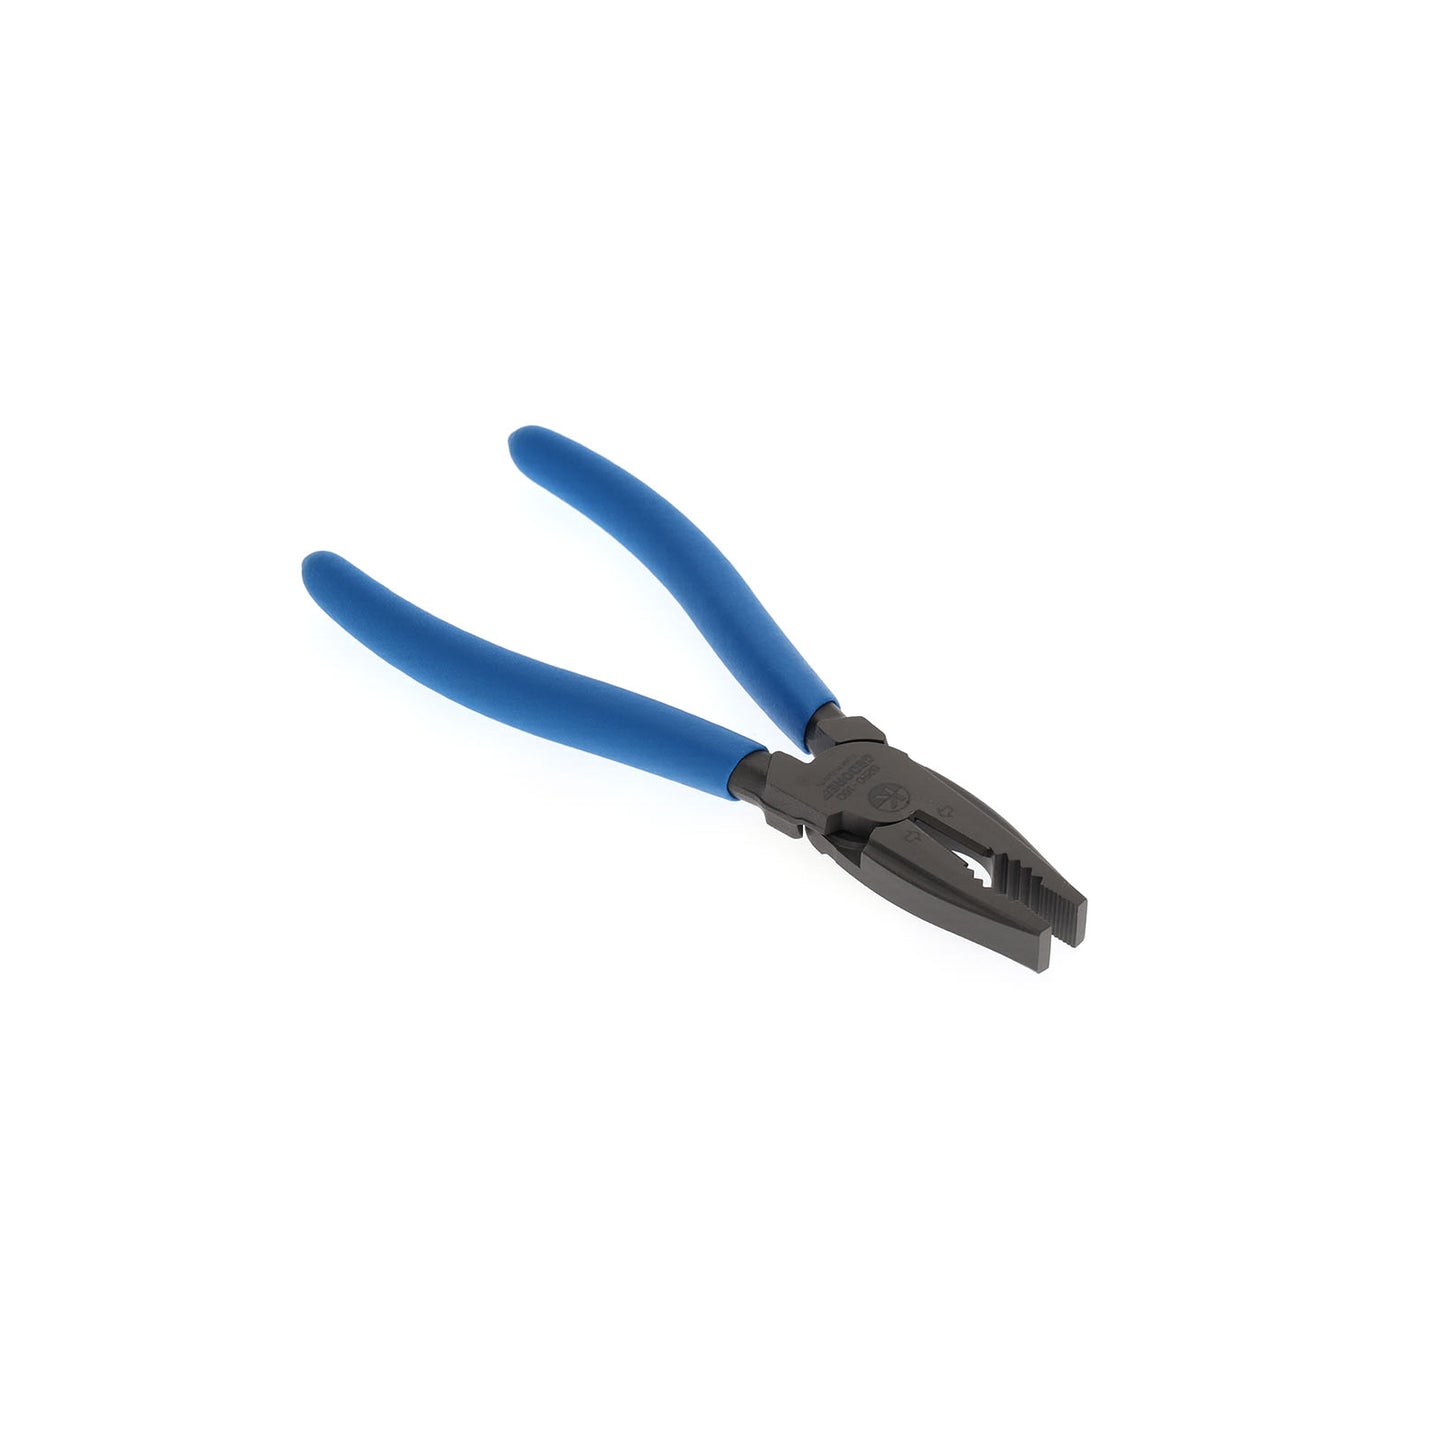 GEDORE 8250-160 TL - Universal force pliers 160 mm (1429574)